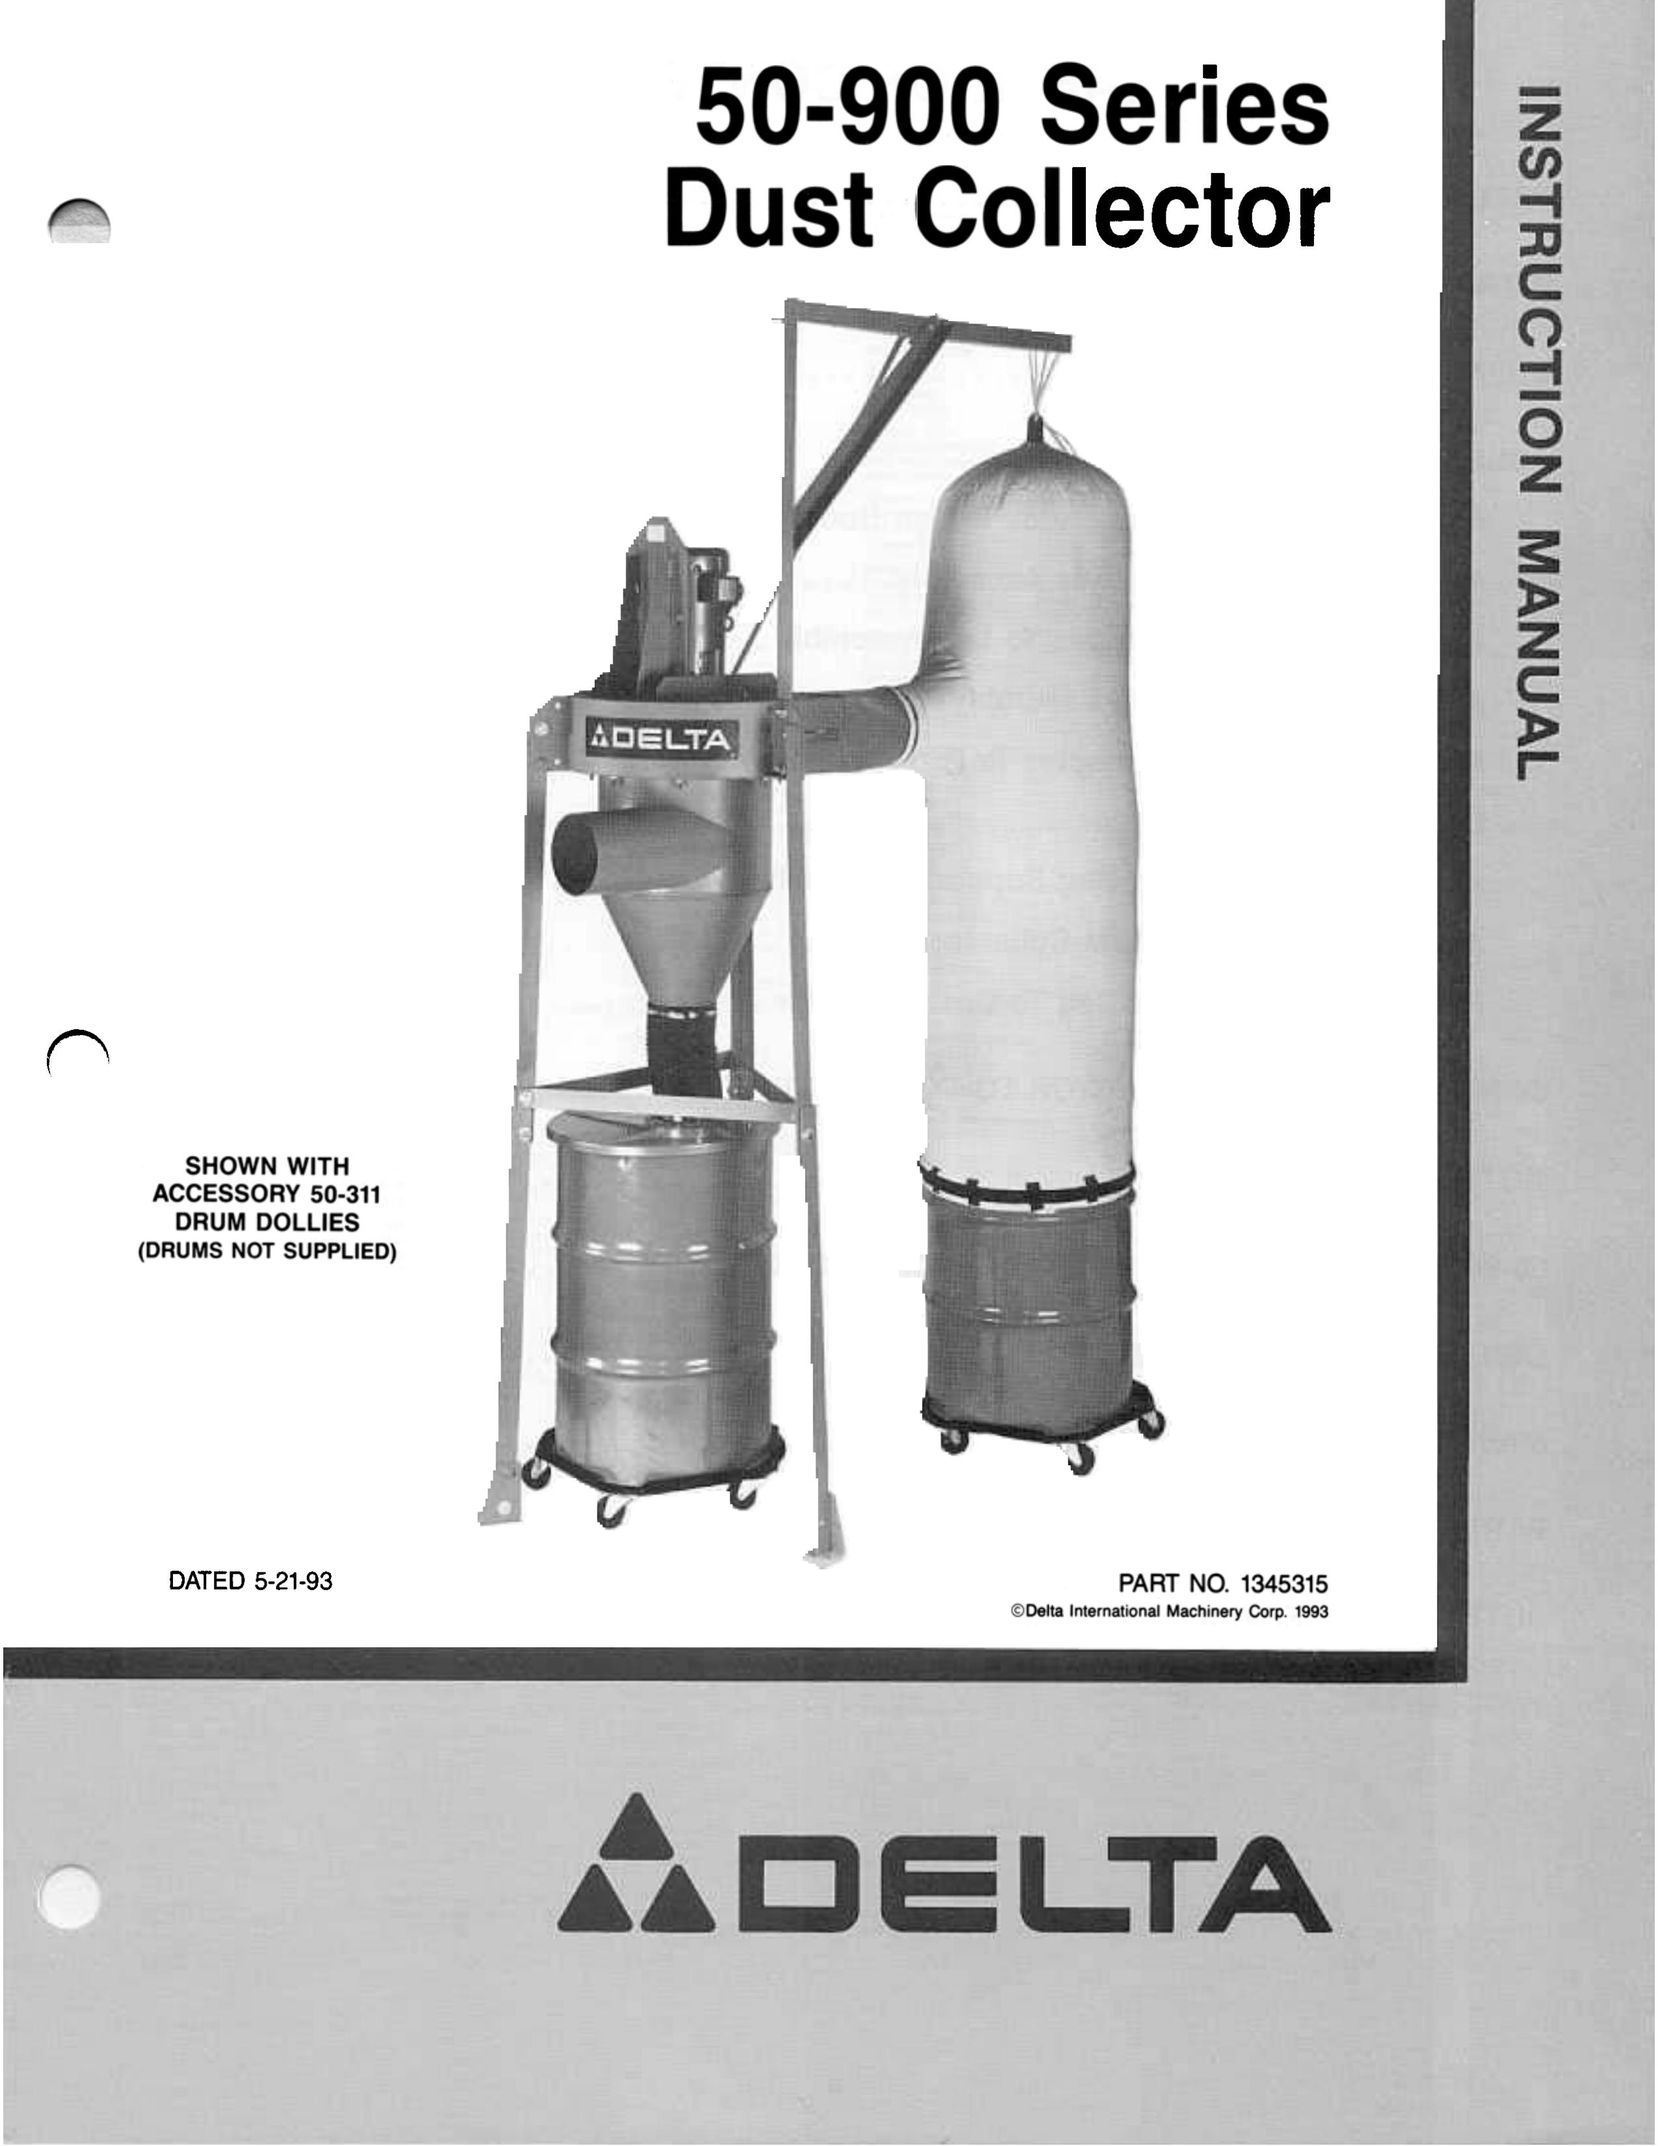 Delta 50-900 Series Dust Collector User Manual